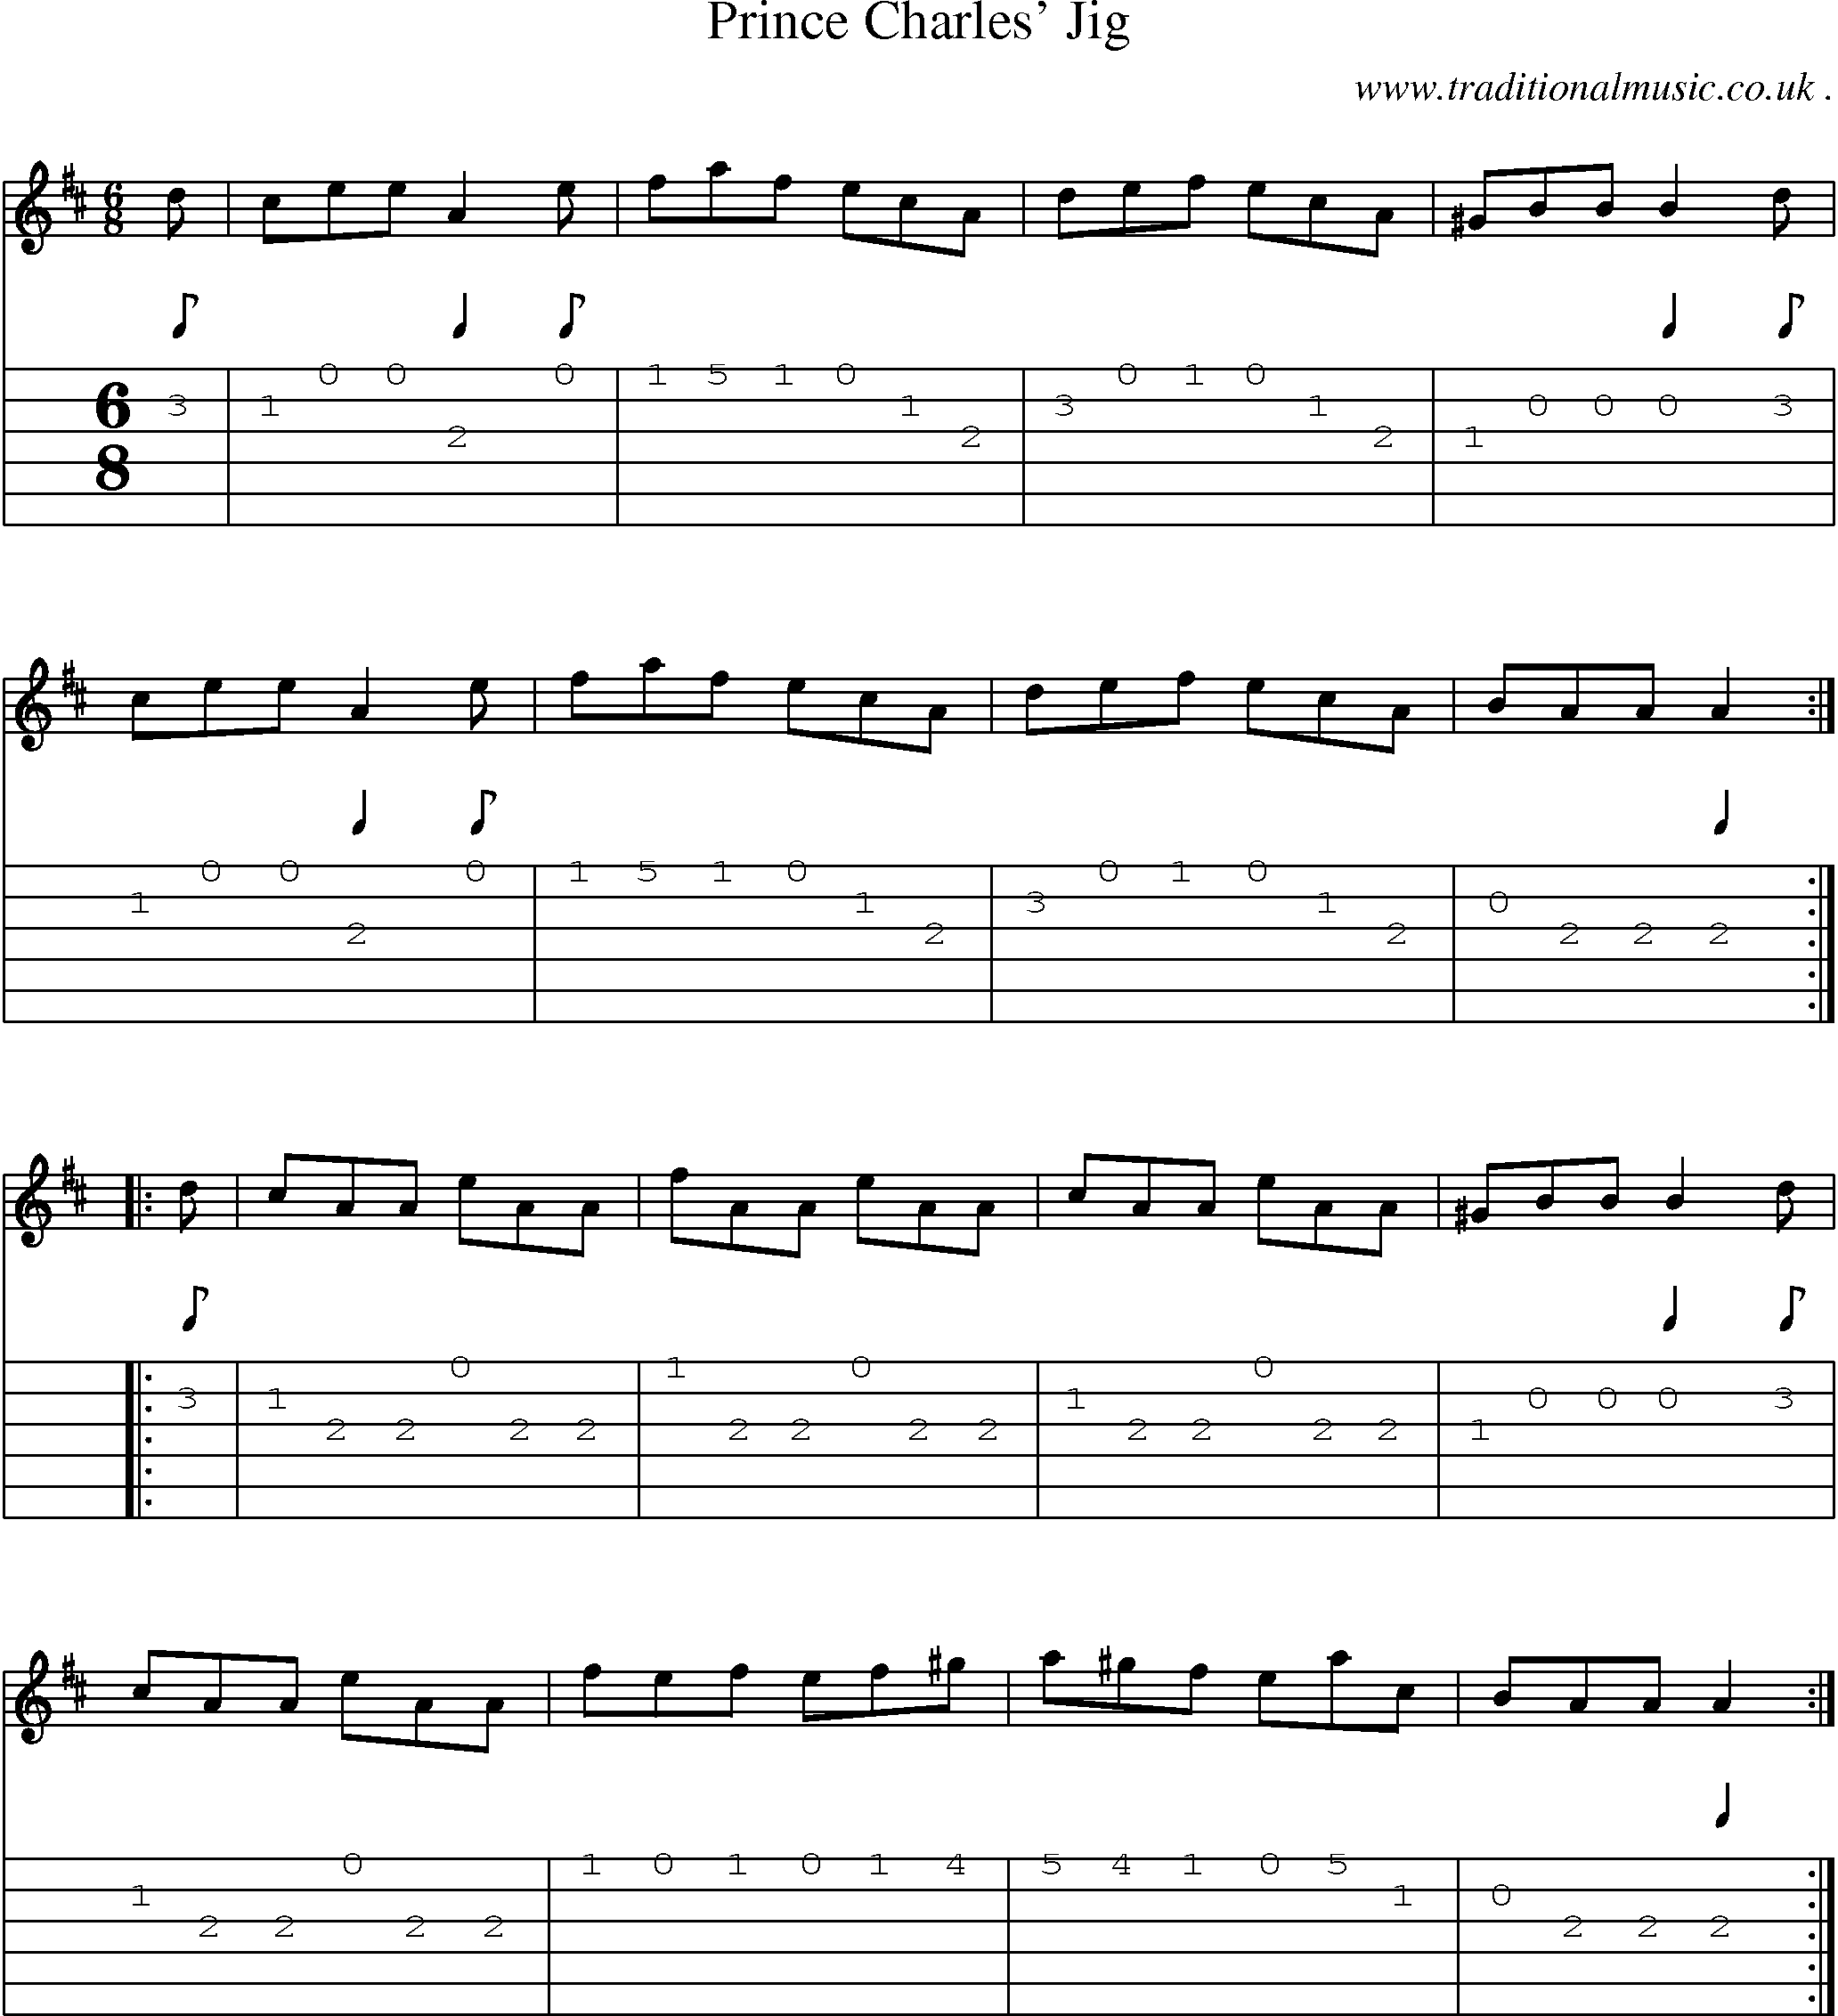 Sheet-Music and Guitar Tabs for Prince Charles Jig